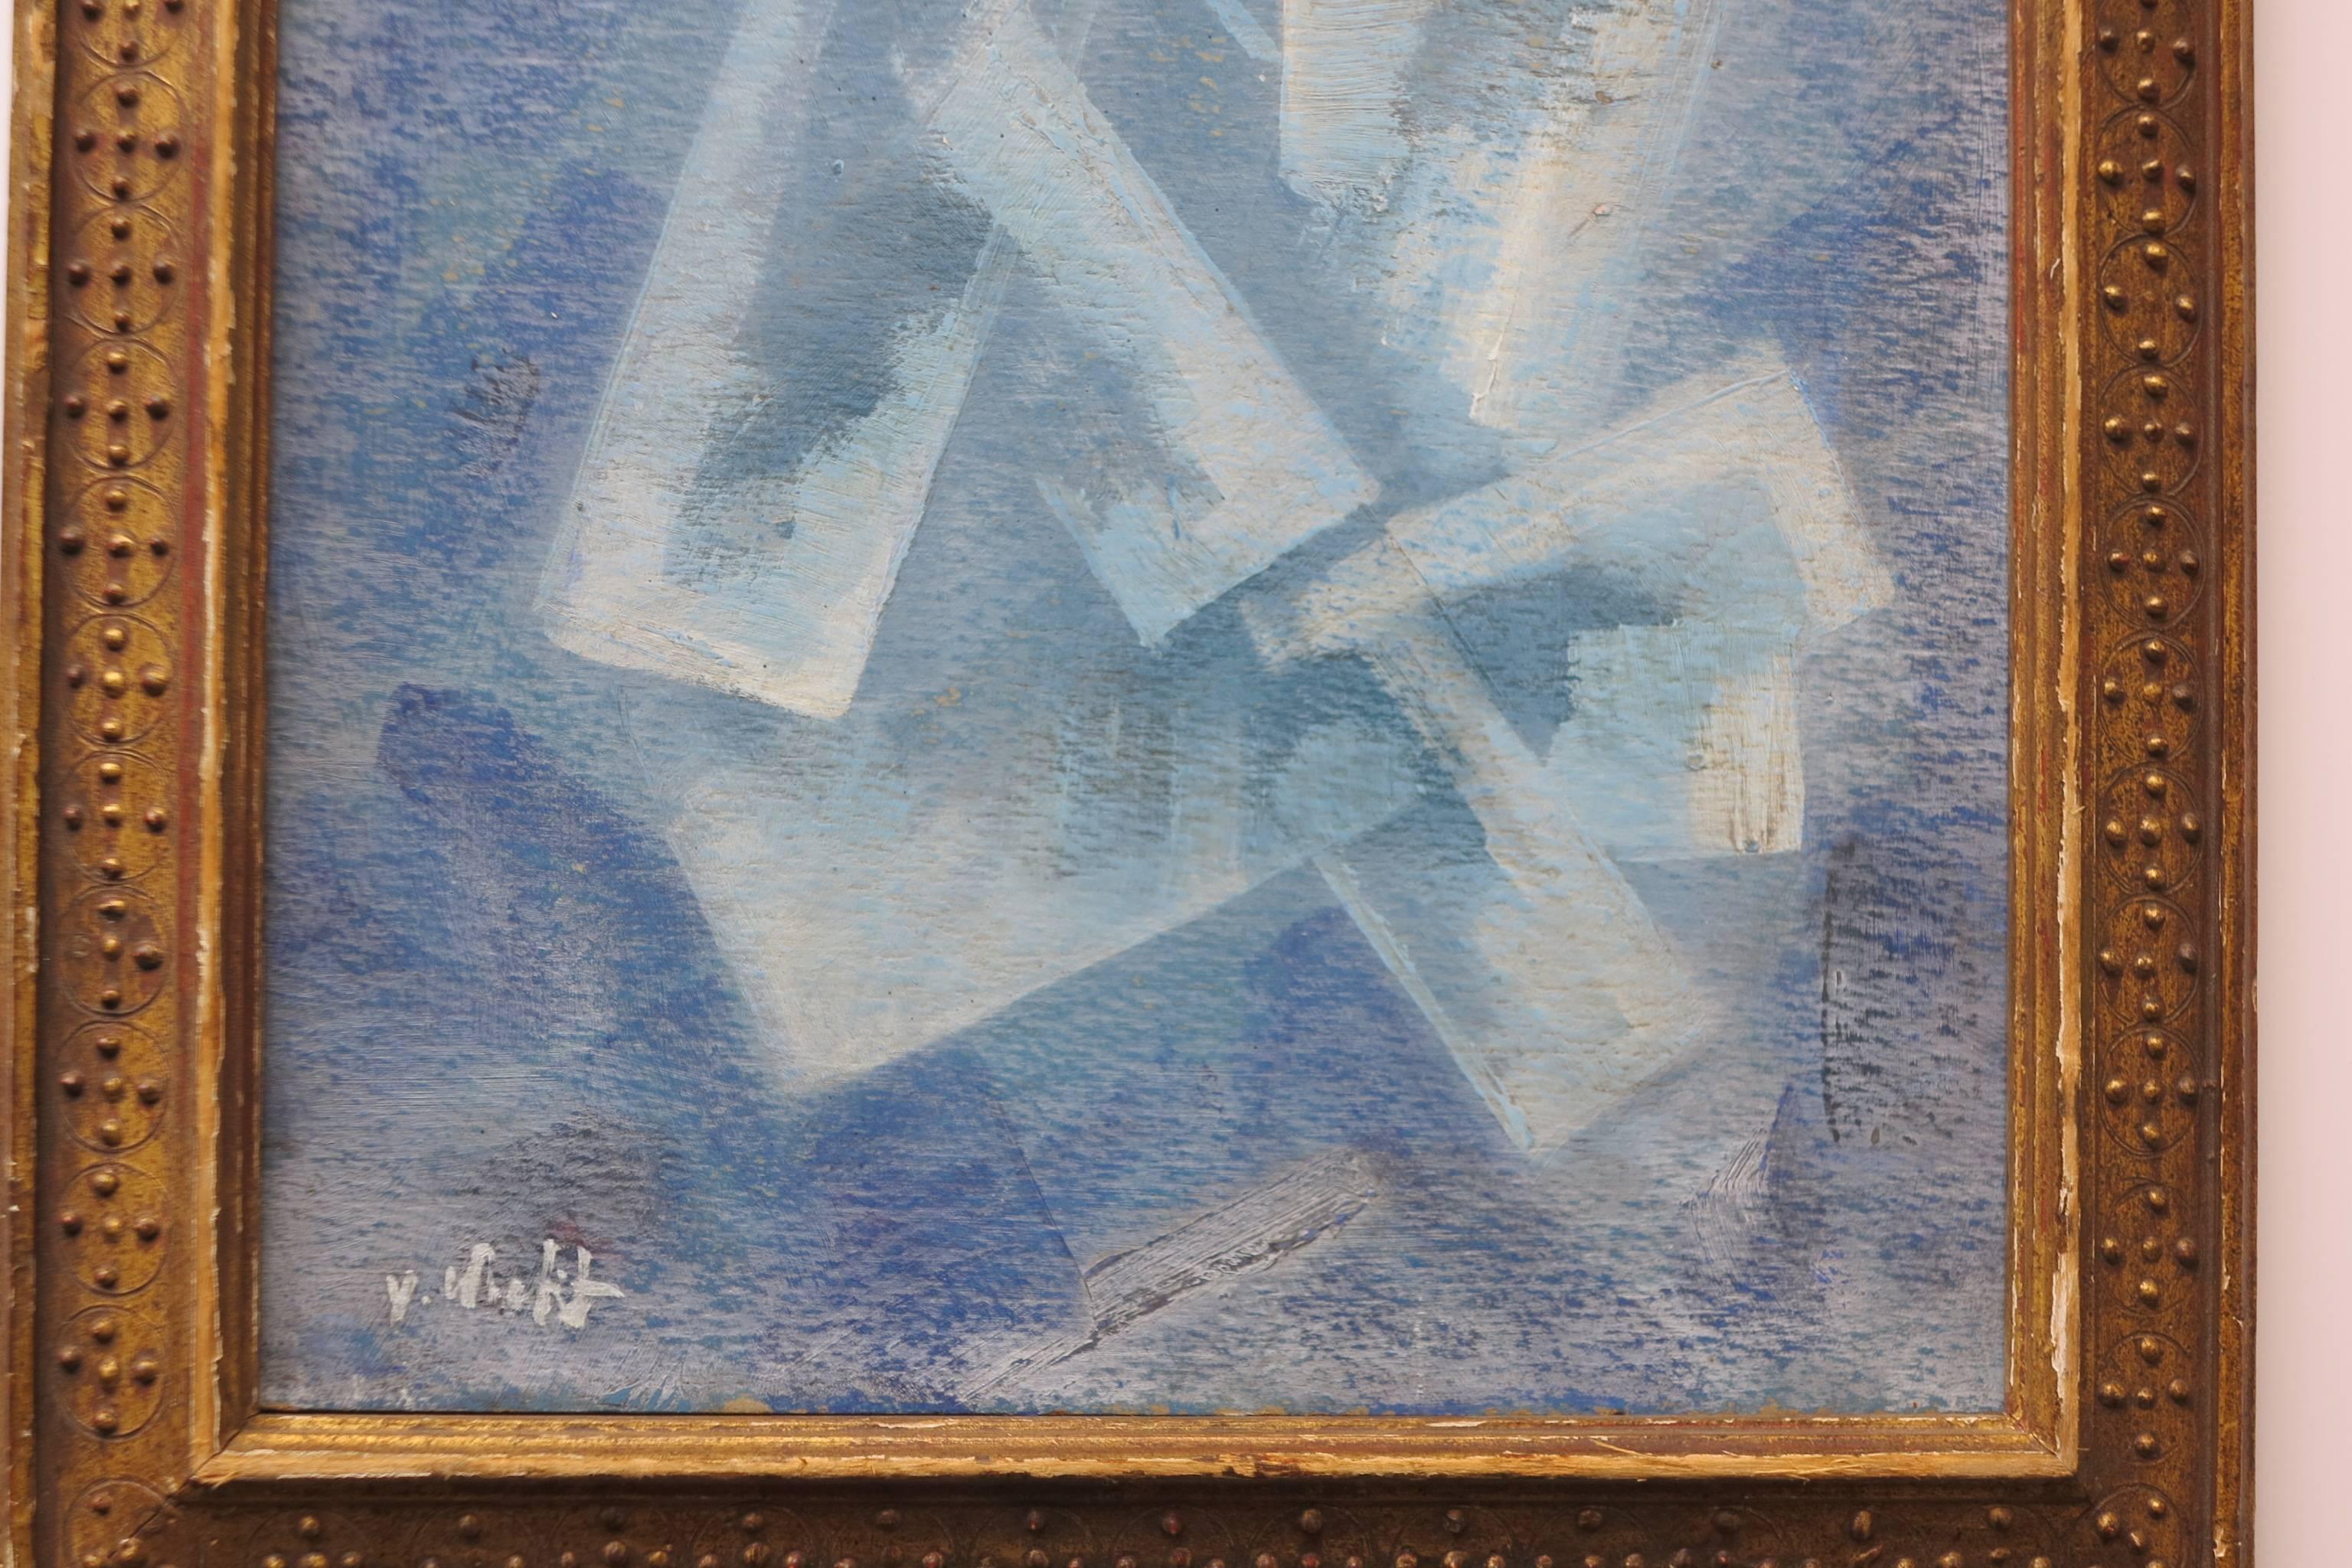 Abstract composition, c.1950. Oil on cardboard panel measures 10 x 13.5 inches. Signed lower left. Gilt frame has some loss to edges. Painting is in excellent condition with no damage or restoration. 

John Von Wicht
1888-1970

In Ad